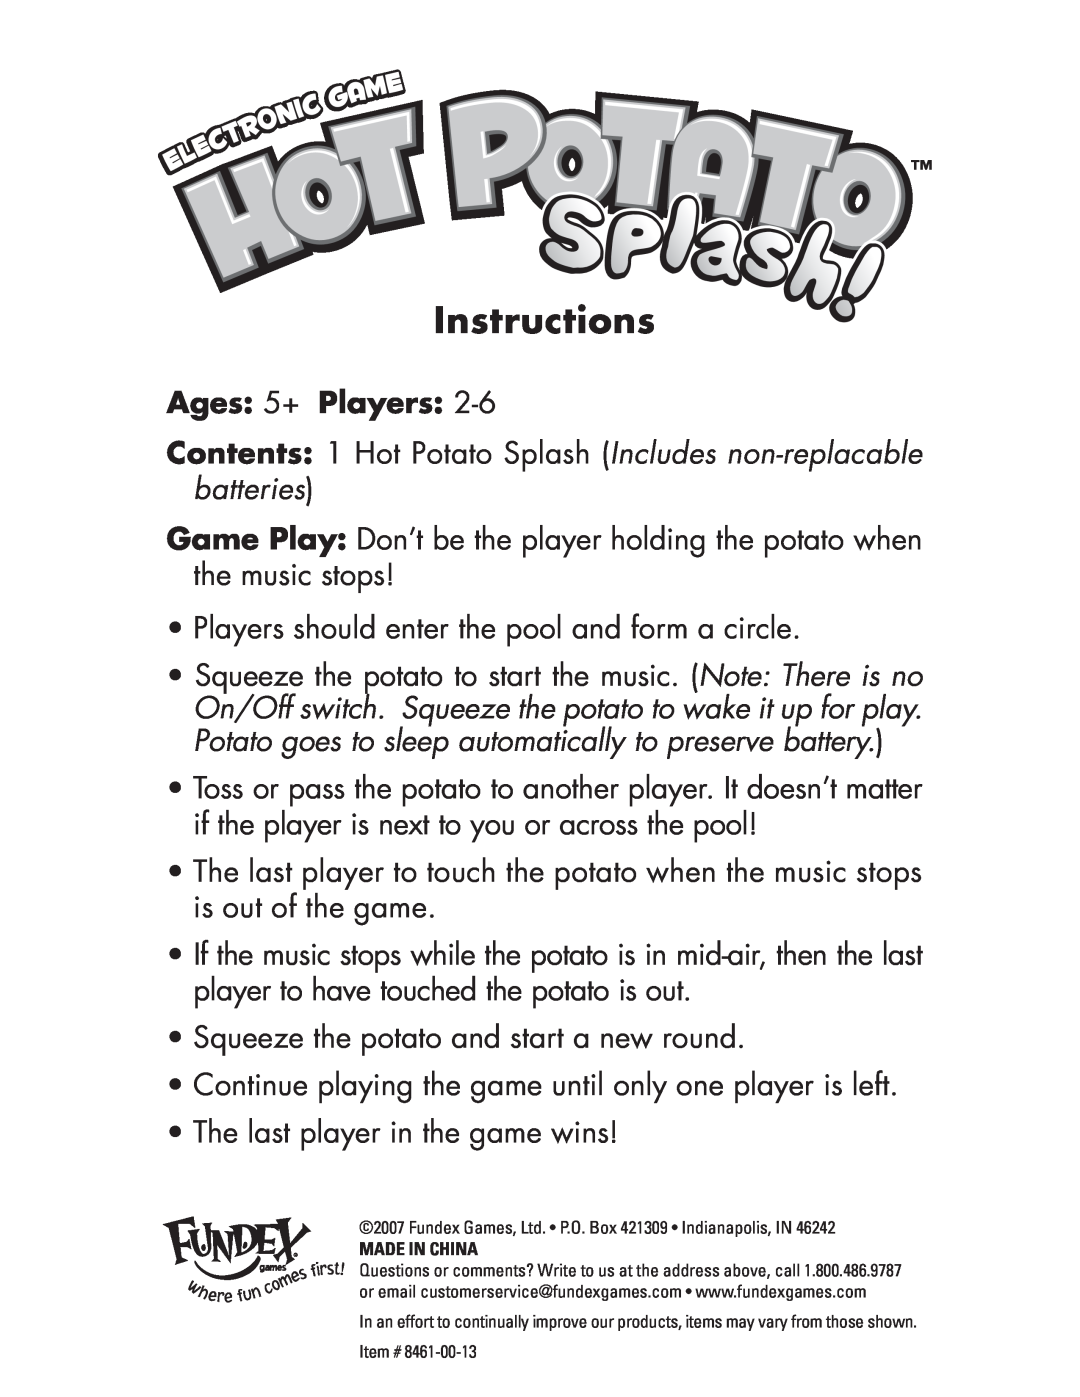 Fundex Games 8461-00-13, Hot Potato Splash manual Instructions, Ages 5+ Players 